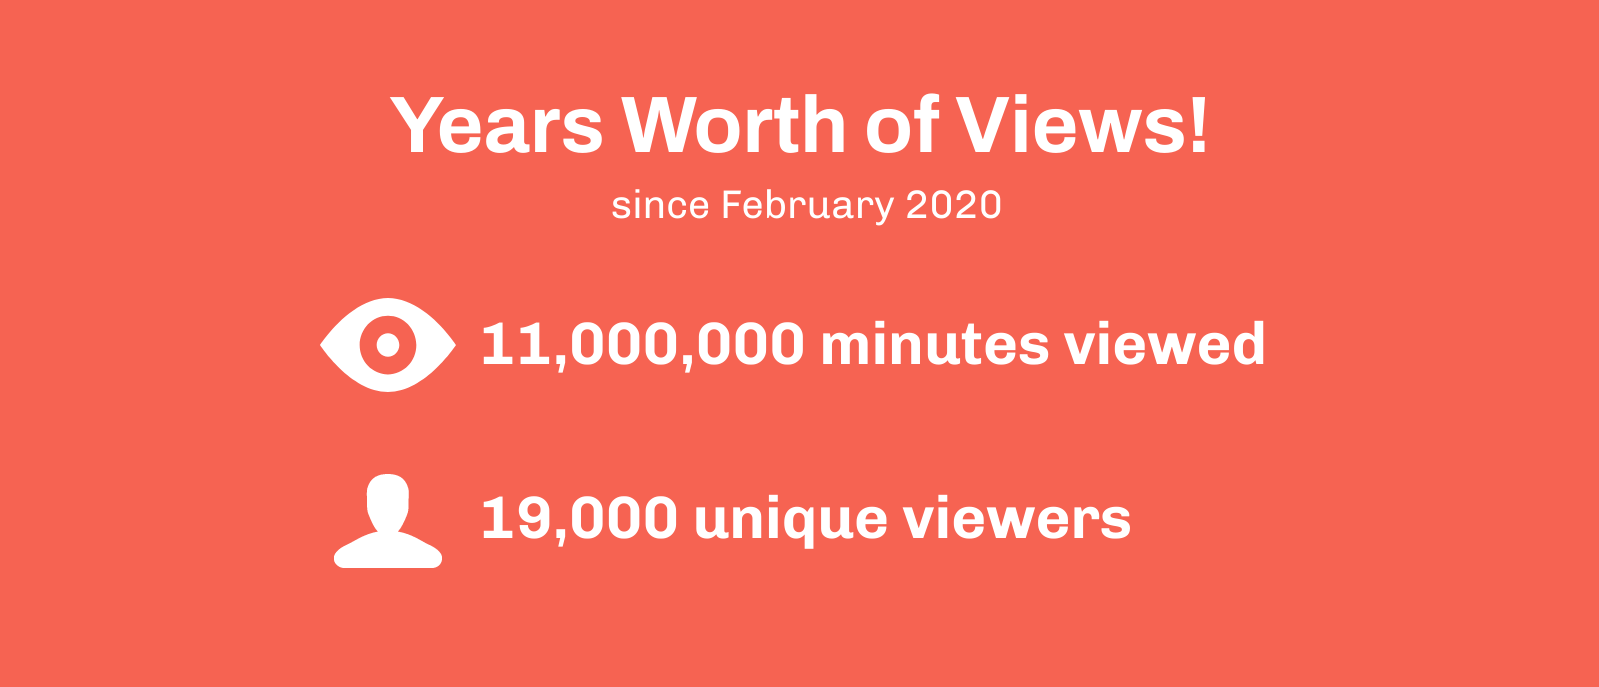 Years worth of views: 11,000,000 minutes viewed, 19,000 unique viewers